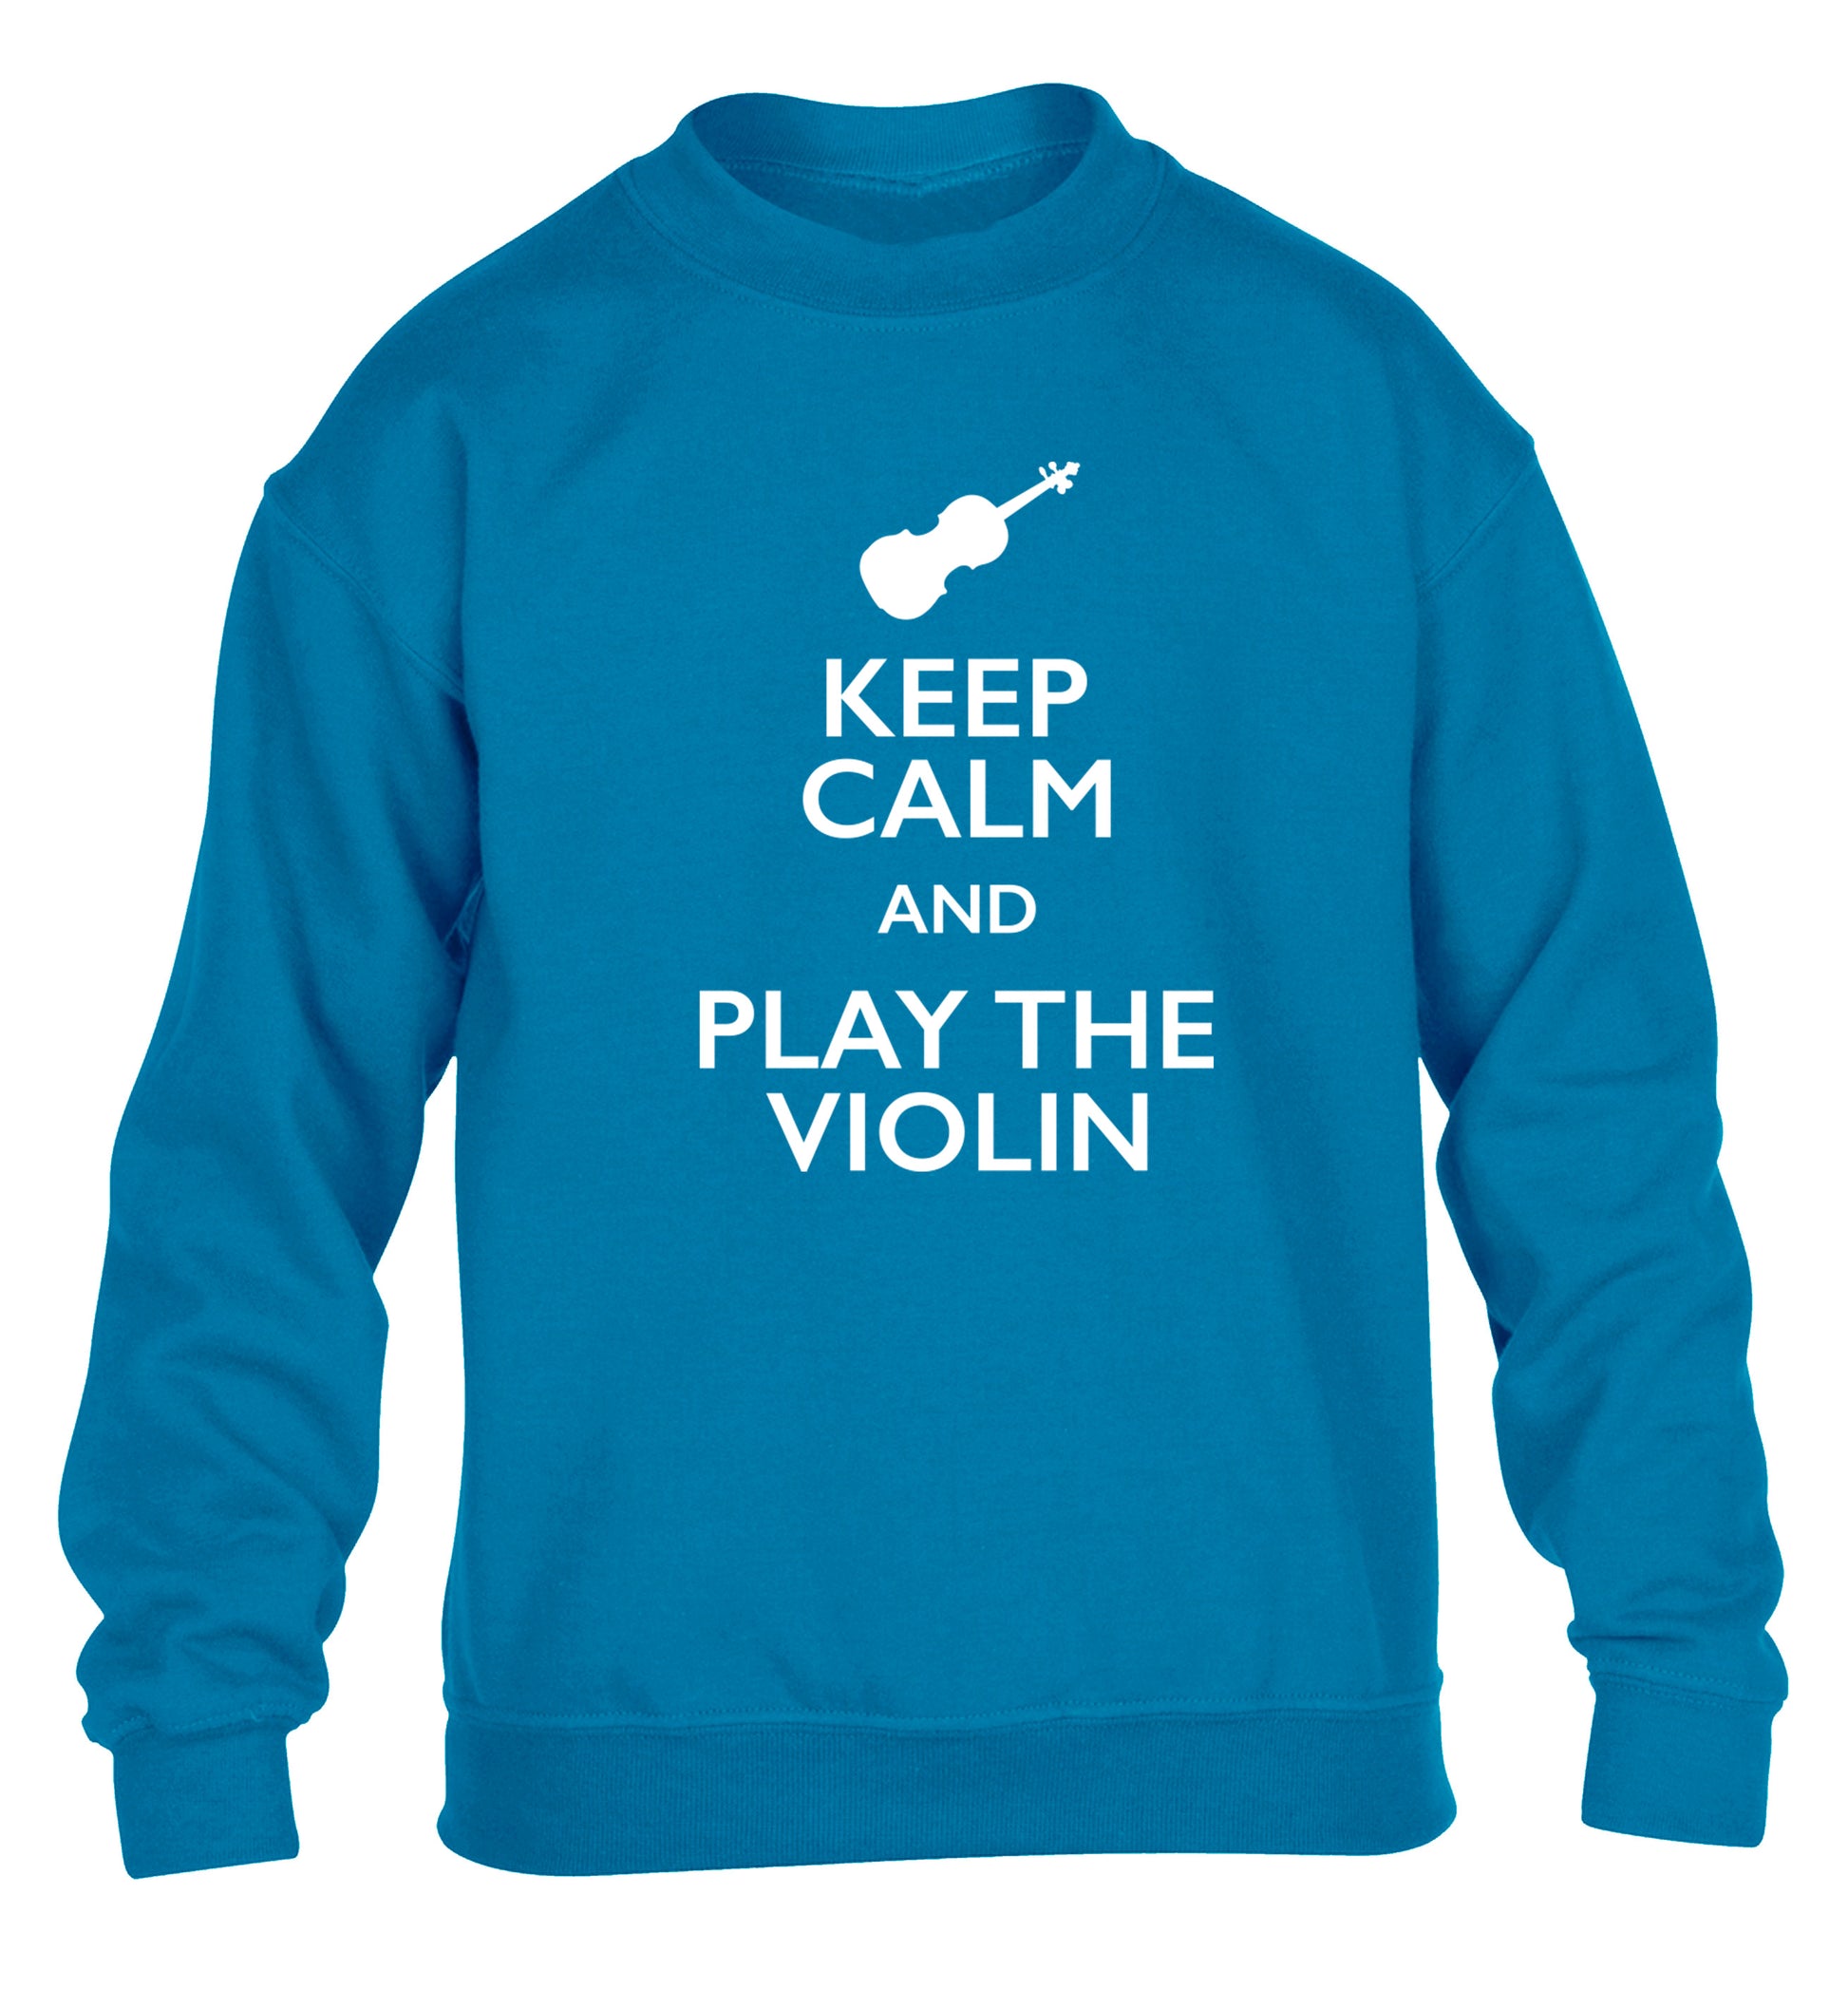 Keep calm and play the violin children's blue sweater 12-13 Years